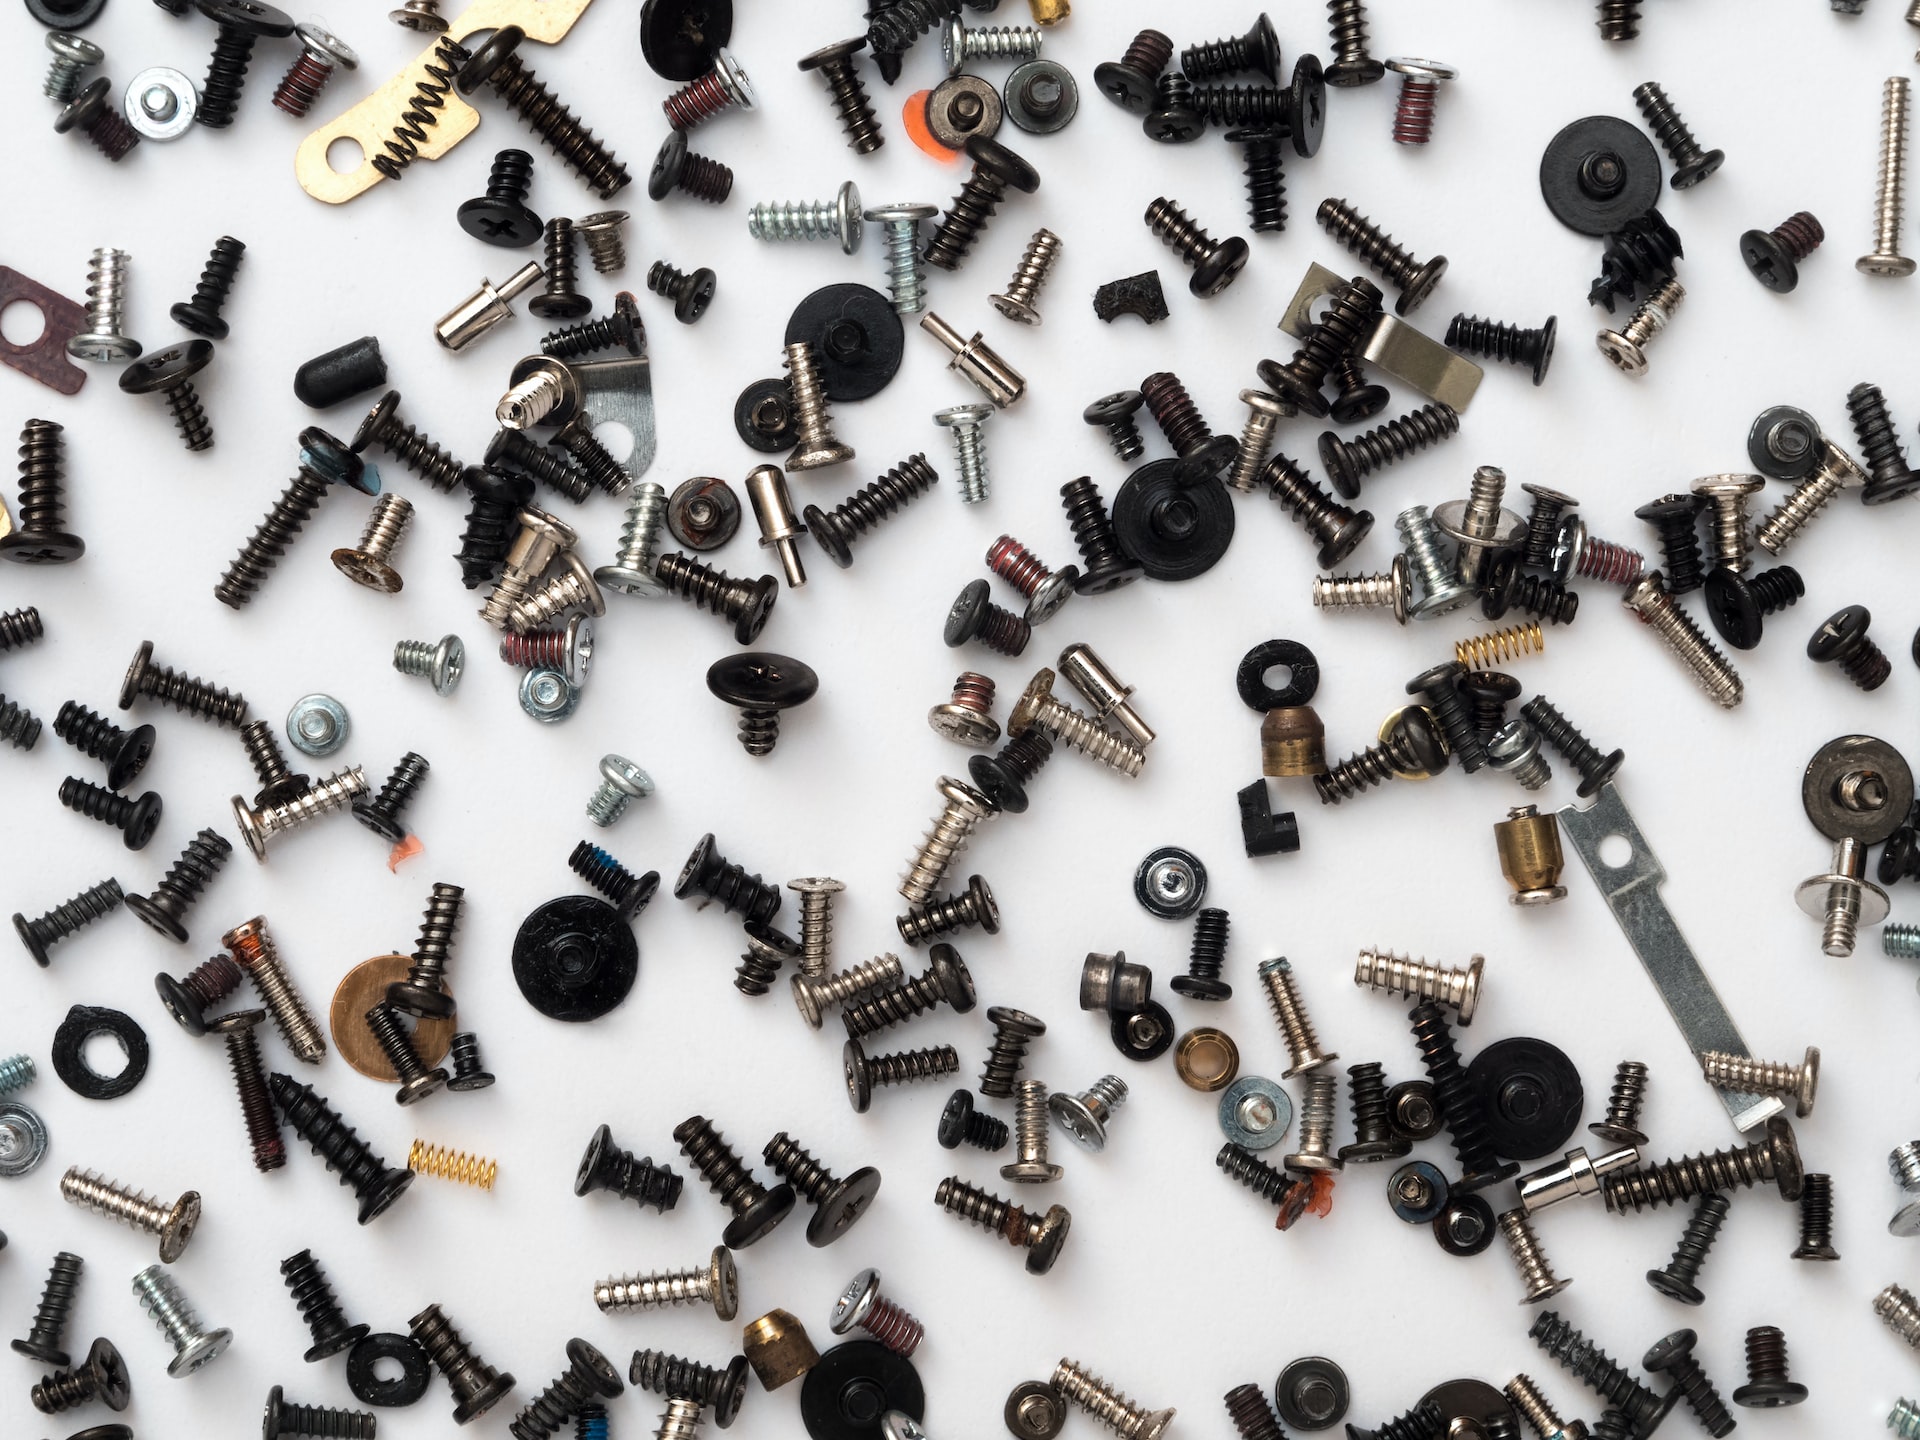 anodizing vs electroplating - screws and other metal parts